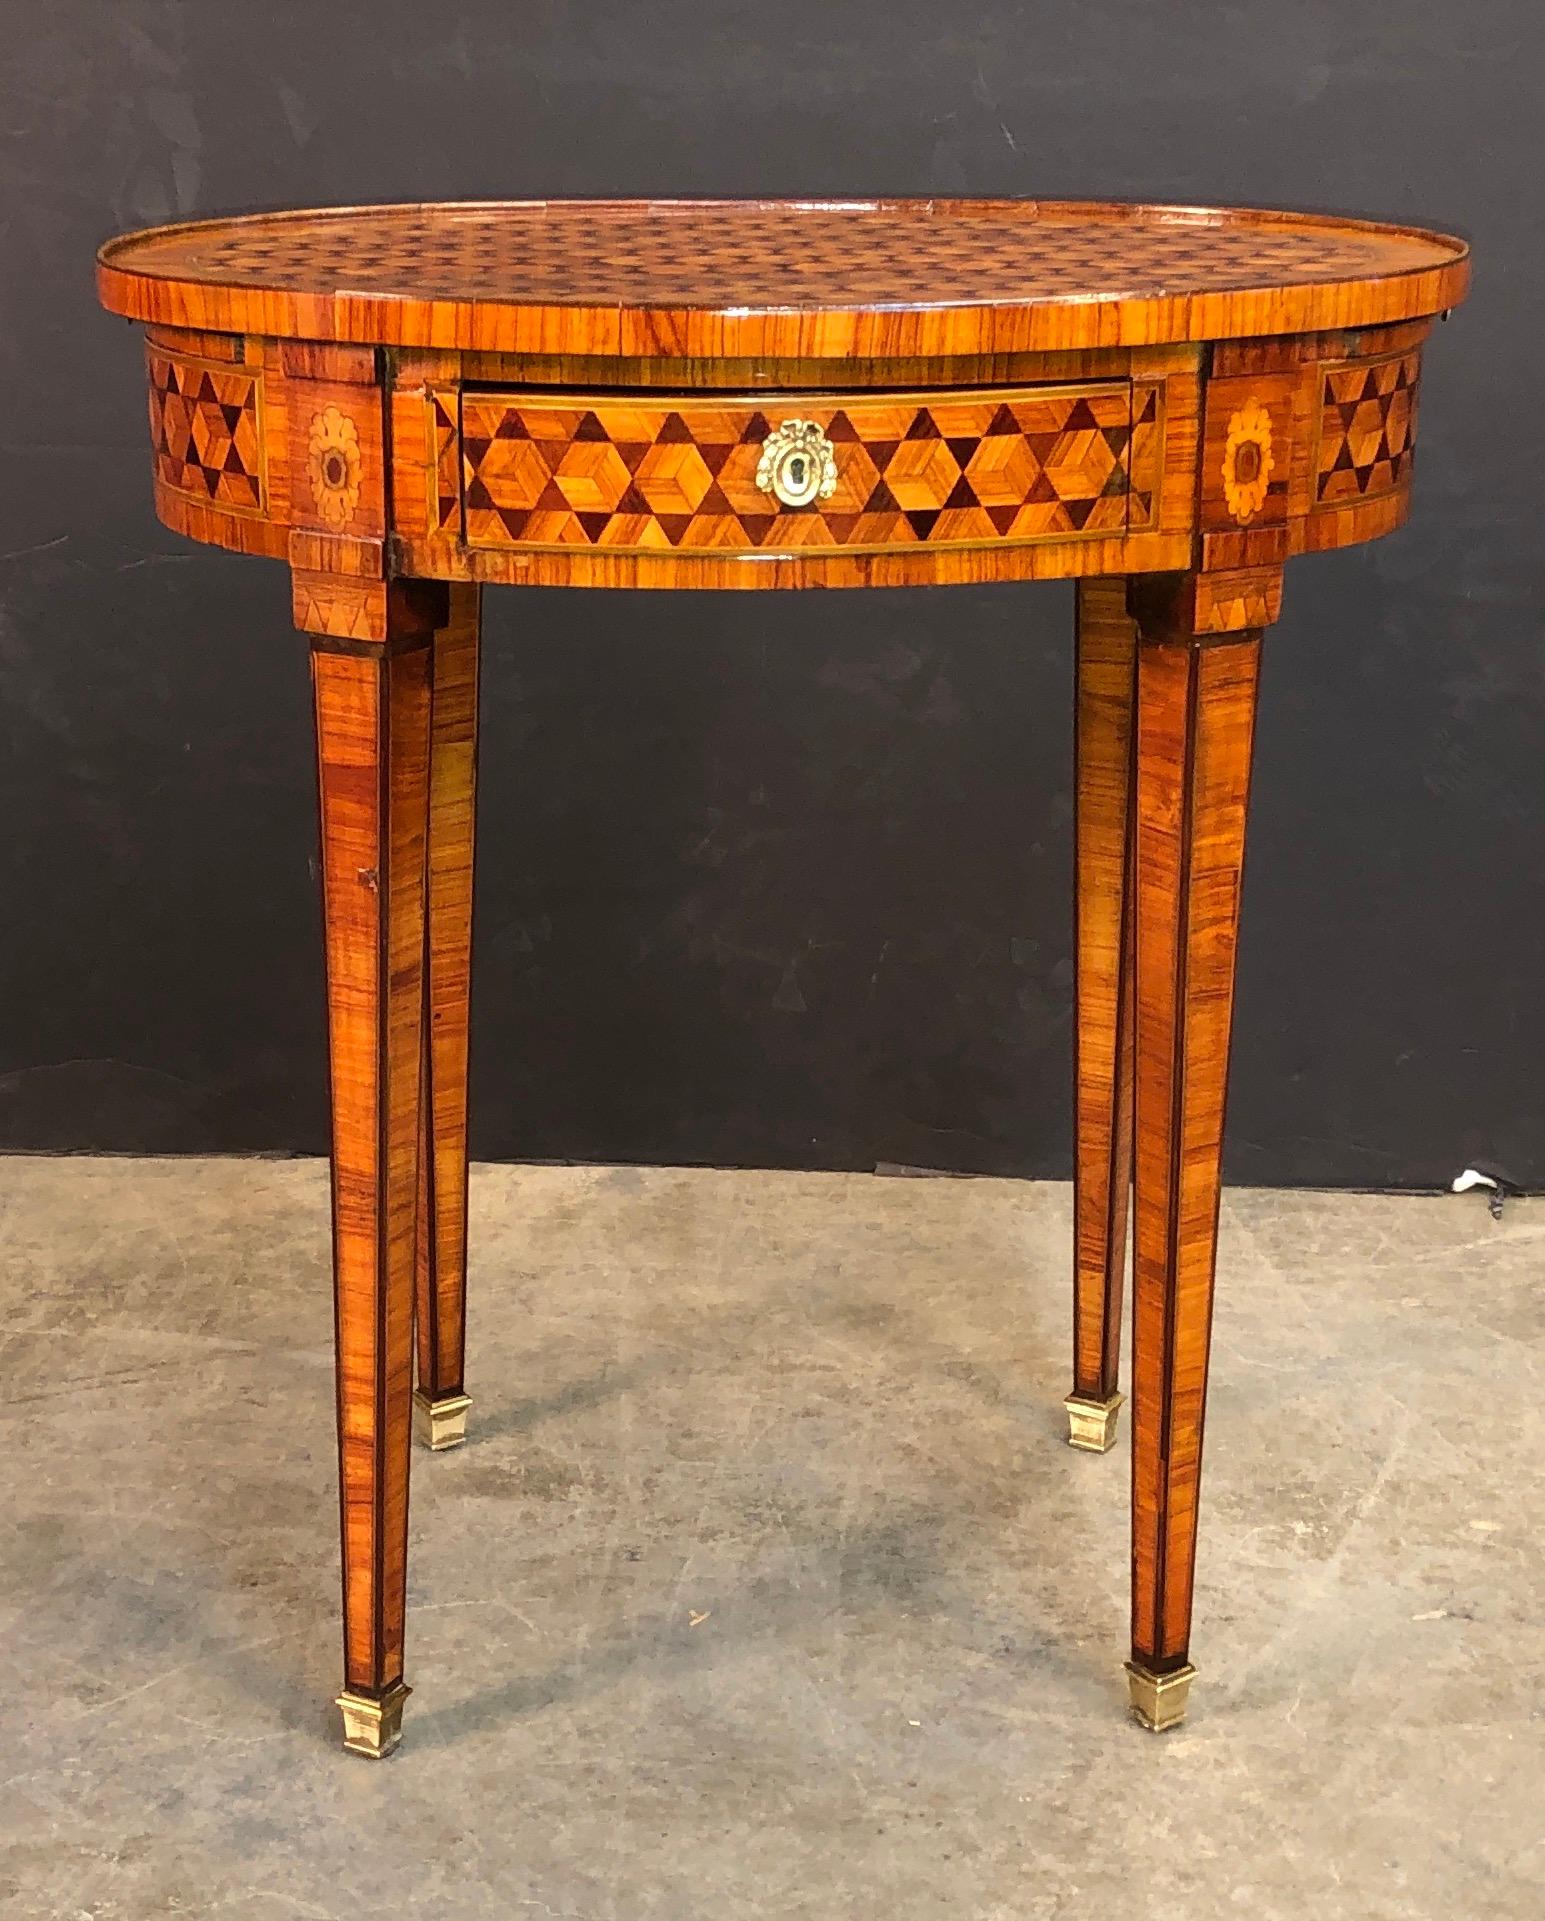 A fine French Louis XVI oval parquetry inlaid side table with a wooden gallery, single central drawer with two leather inset top candle slides, with bronze mounts and square tapered legs.